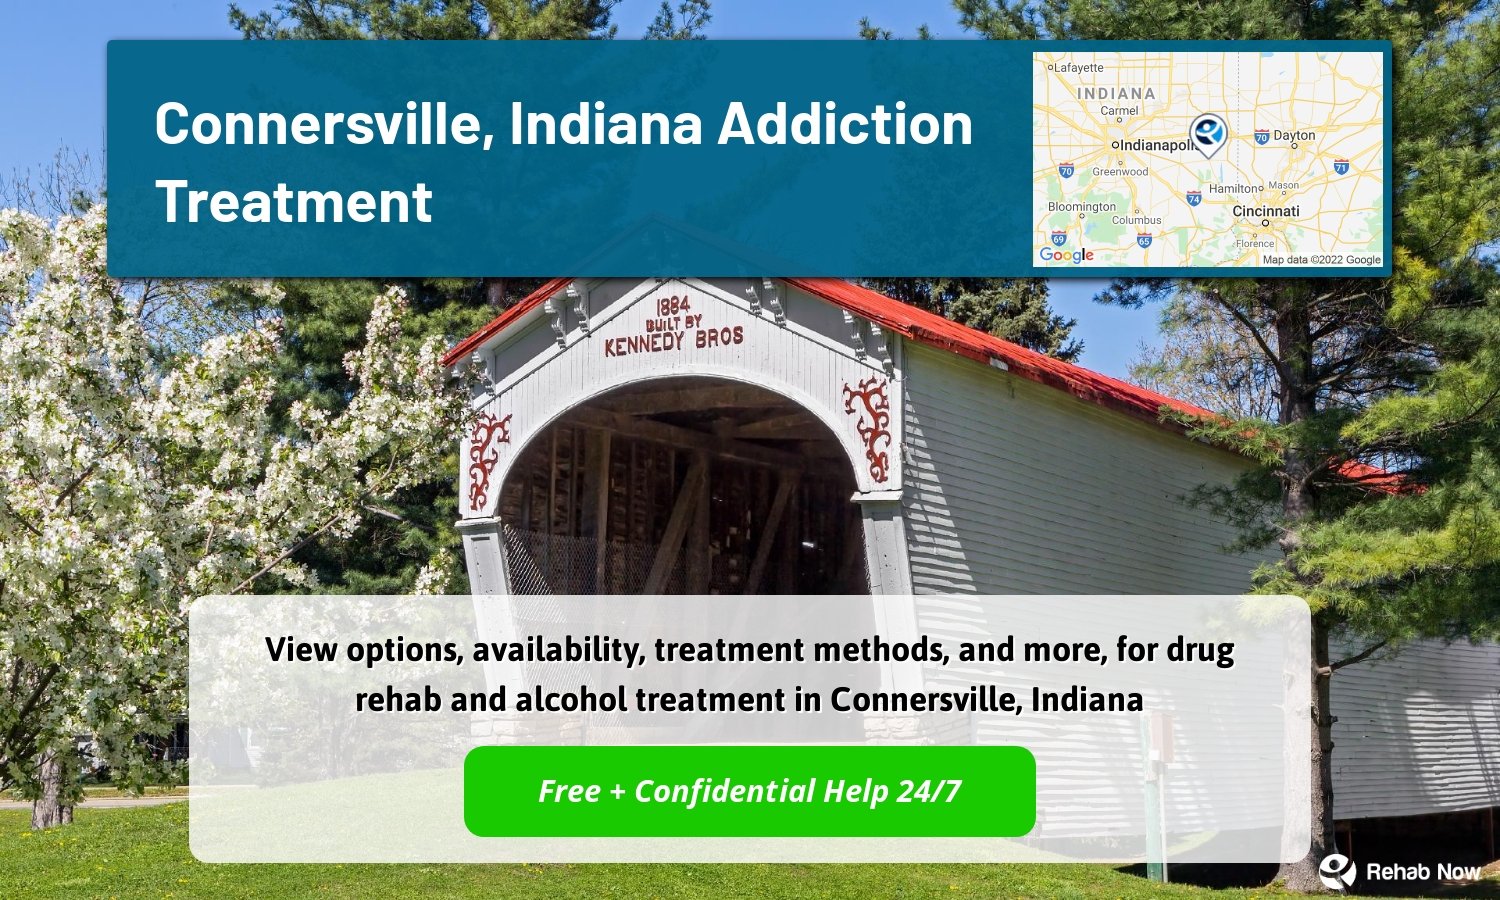 View options, availability, treatment methods, and more, for drug rehab and alcohol treatment in Connersville, Indiana